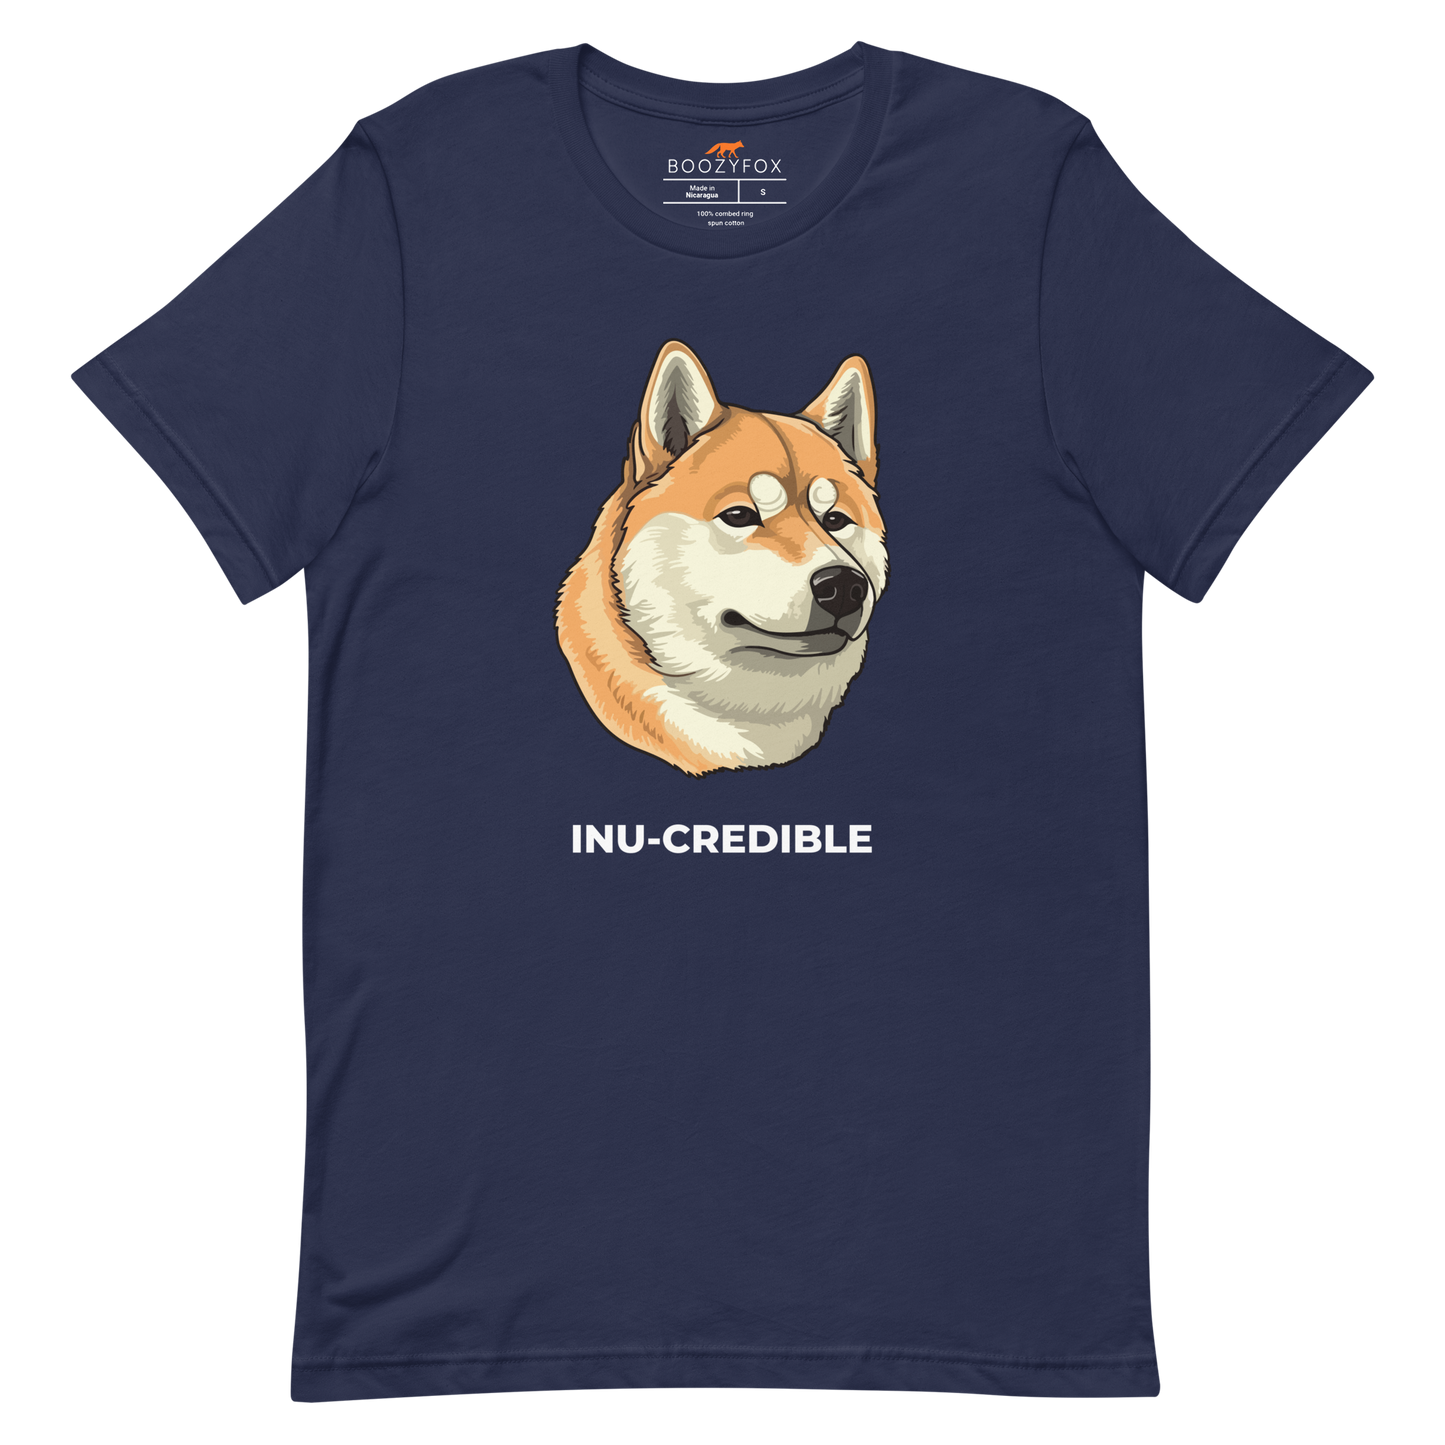 Navy Premium Shiba Inu T-Shirt featuring the Inu-Credible graphic on the chest - Funny Graphic Shiba Inu Tees - Boozy Fox